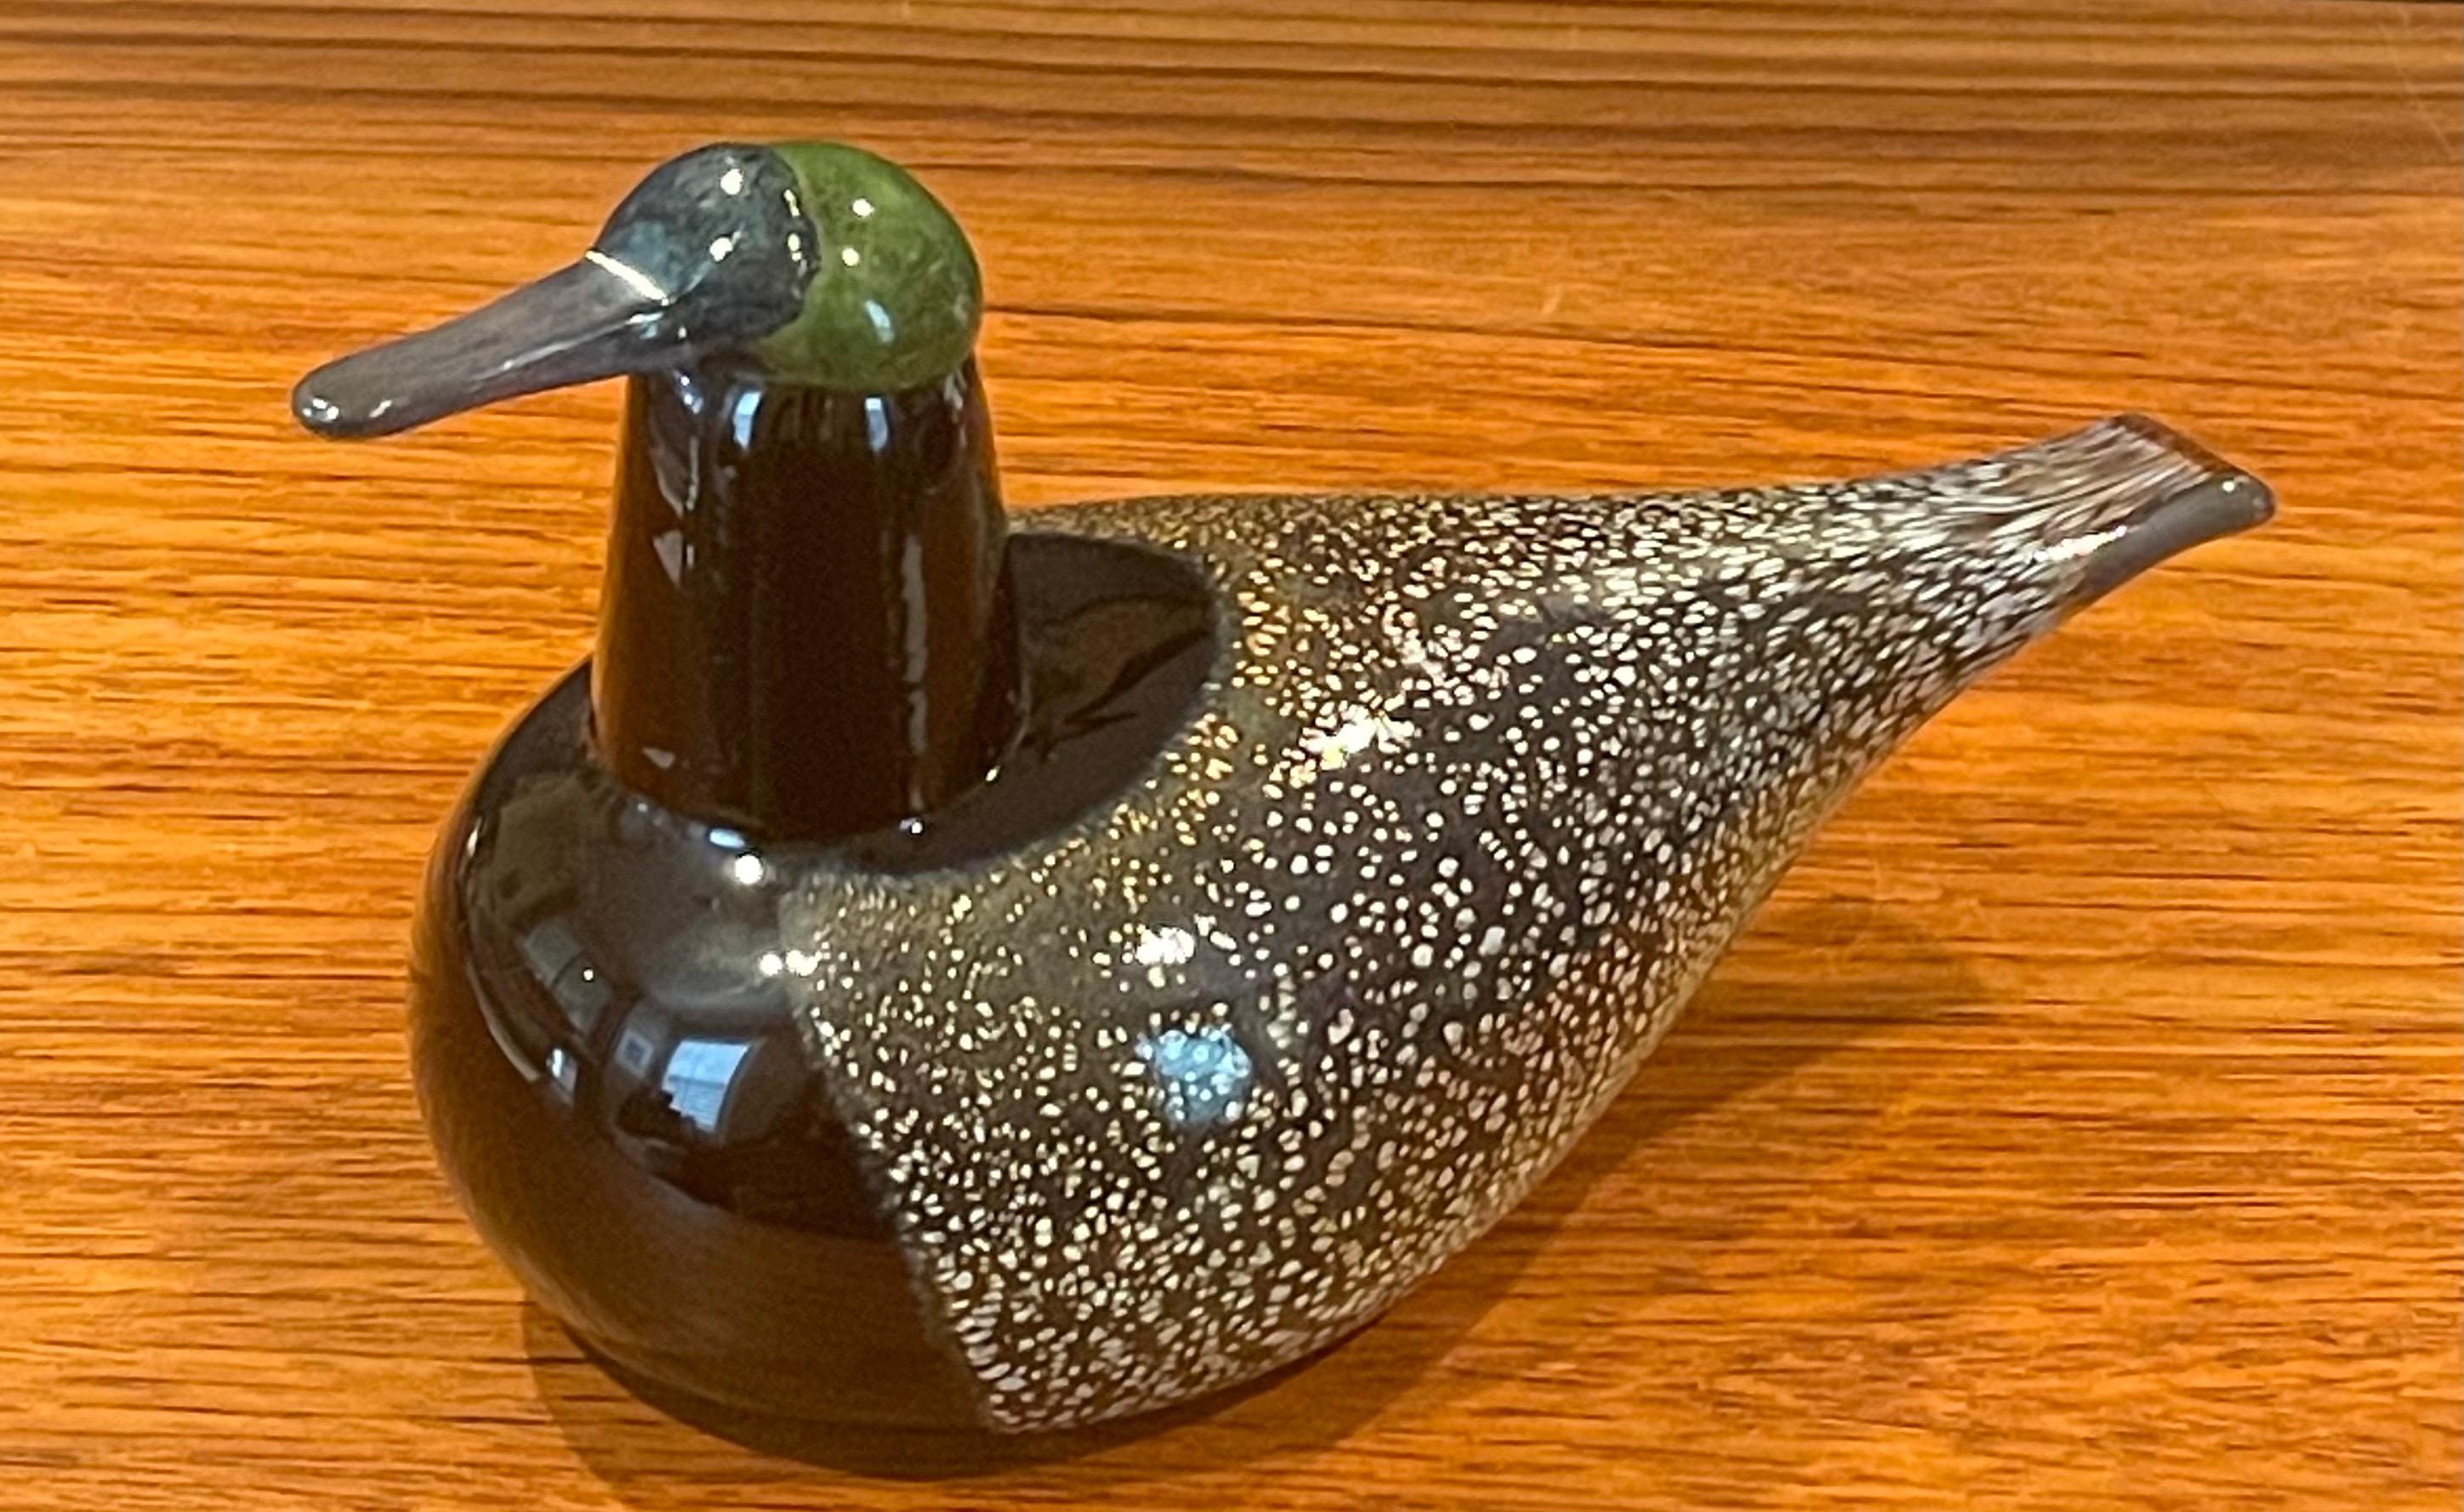 Gorgeous art glass bird sculpture by Oiva Toikka for Iittala of Finland, circa 1990s. This sculpture is mouth blown and is in great vintage condition with no chips or cracks. The piece measures 9.25